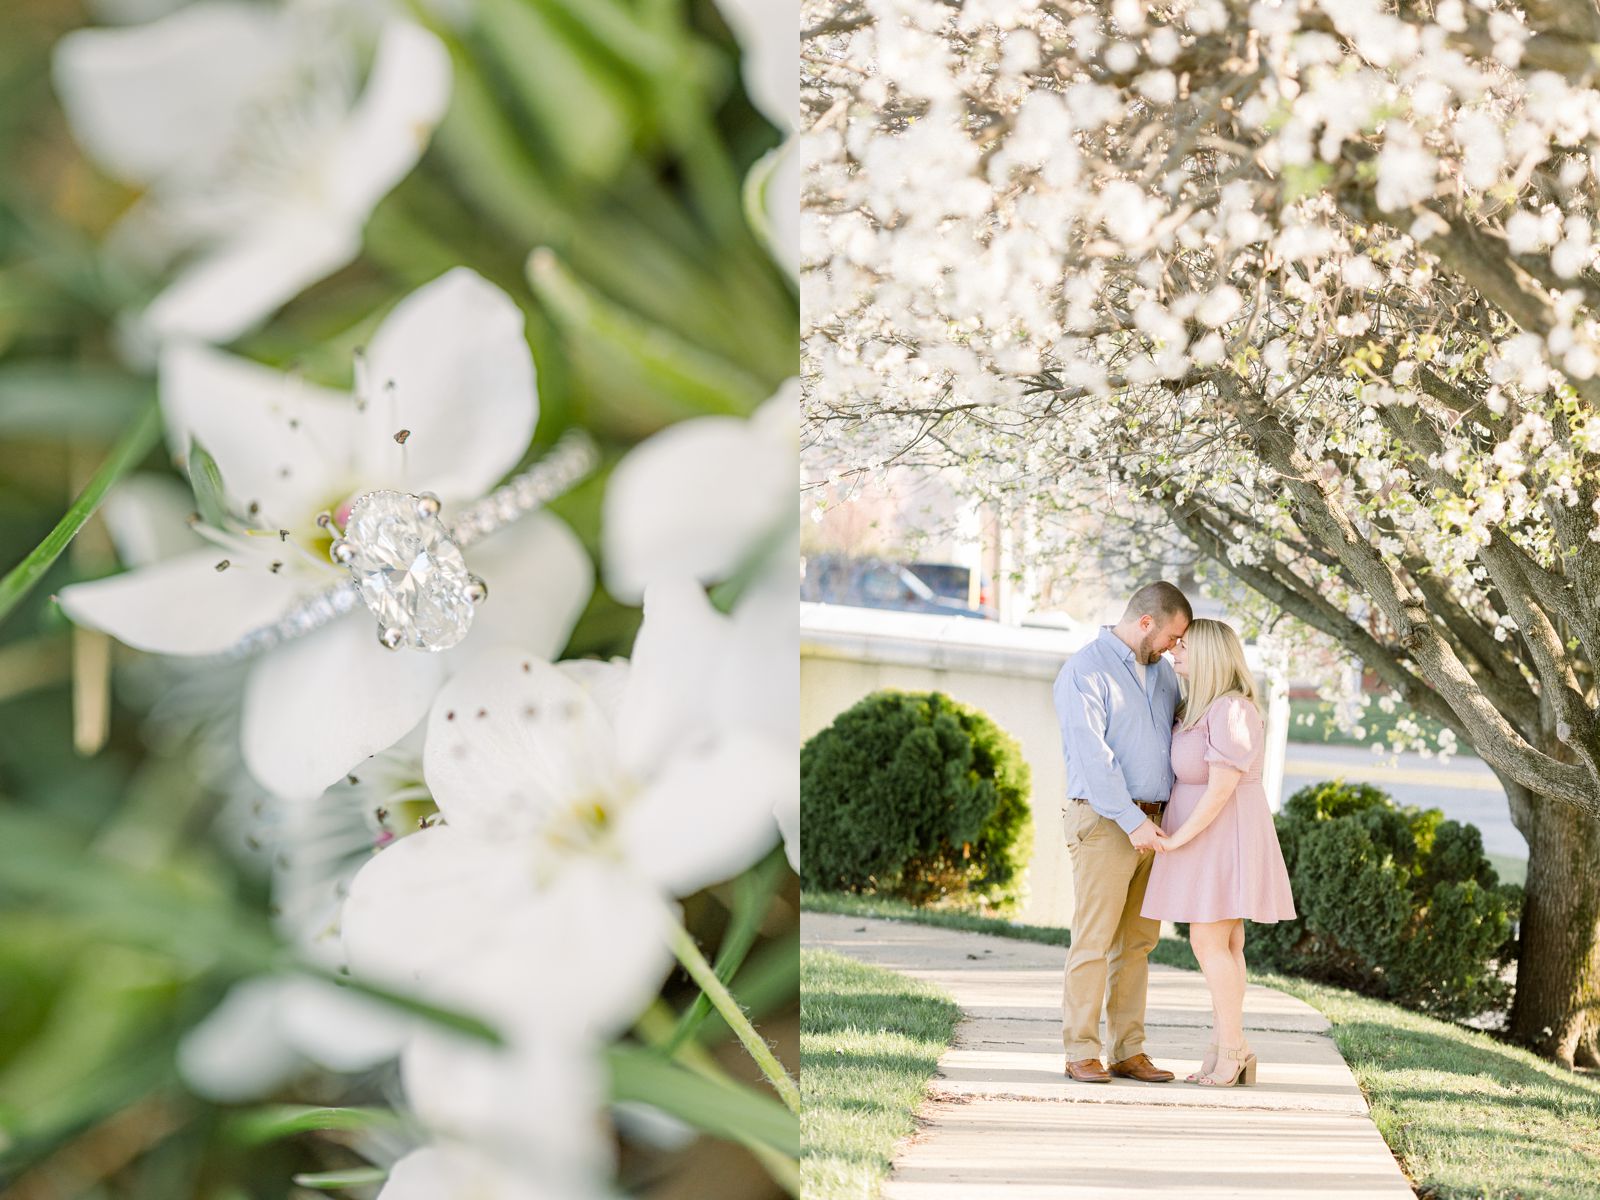 Spring_wedding_engagement_photos_locations_st_james_rolla_jeff_columbia_videography_outfits_blossoms_trees_flowers_best_top_reputable_